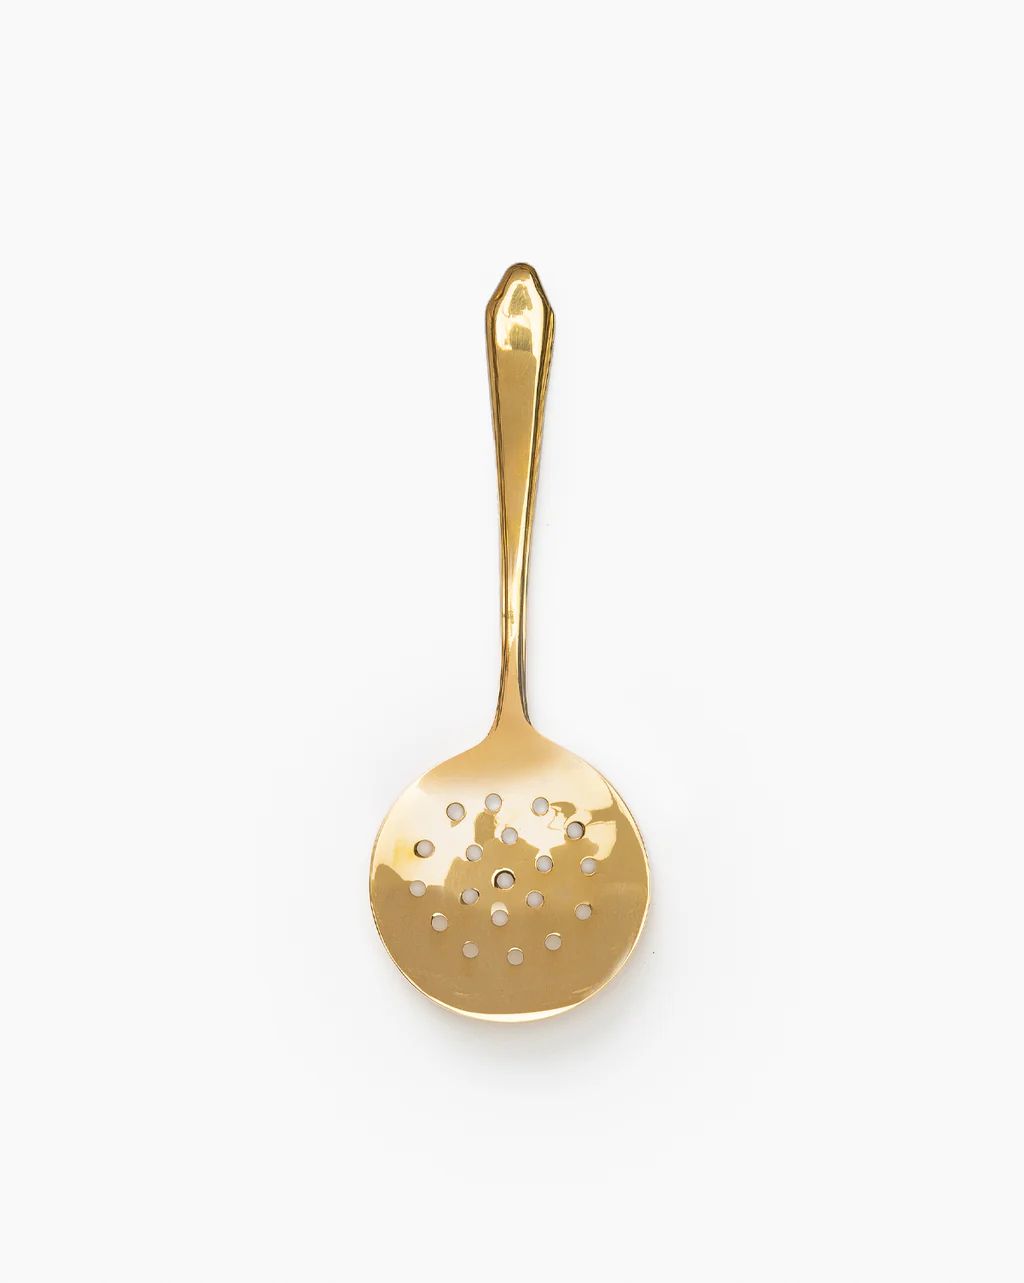 Brass Strainer | McGee & Co.